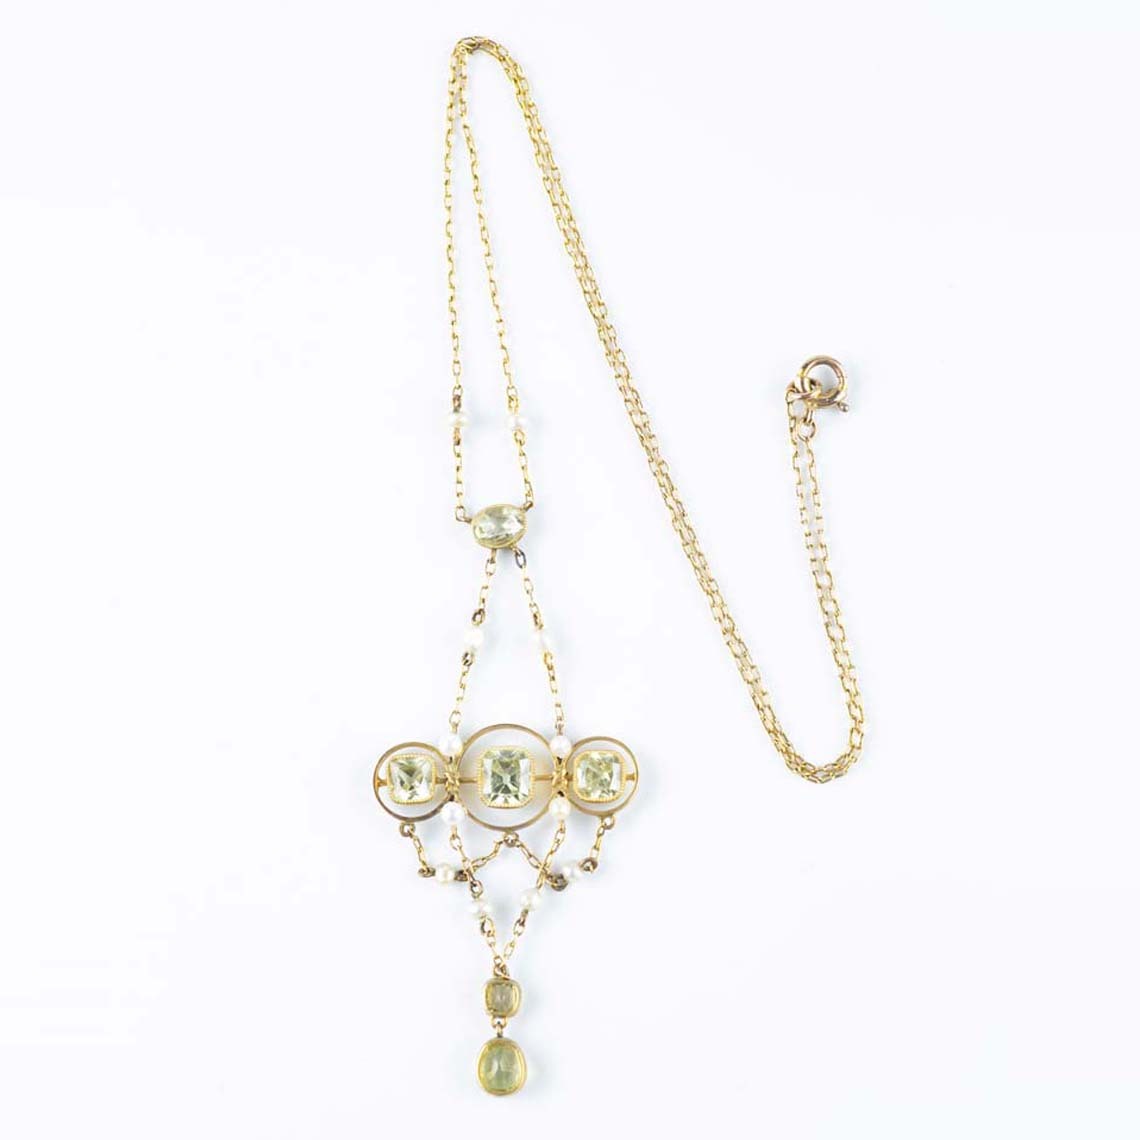 Victorian Tourmaline and Seed Pearl Necklace